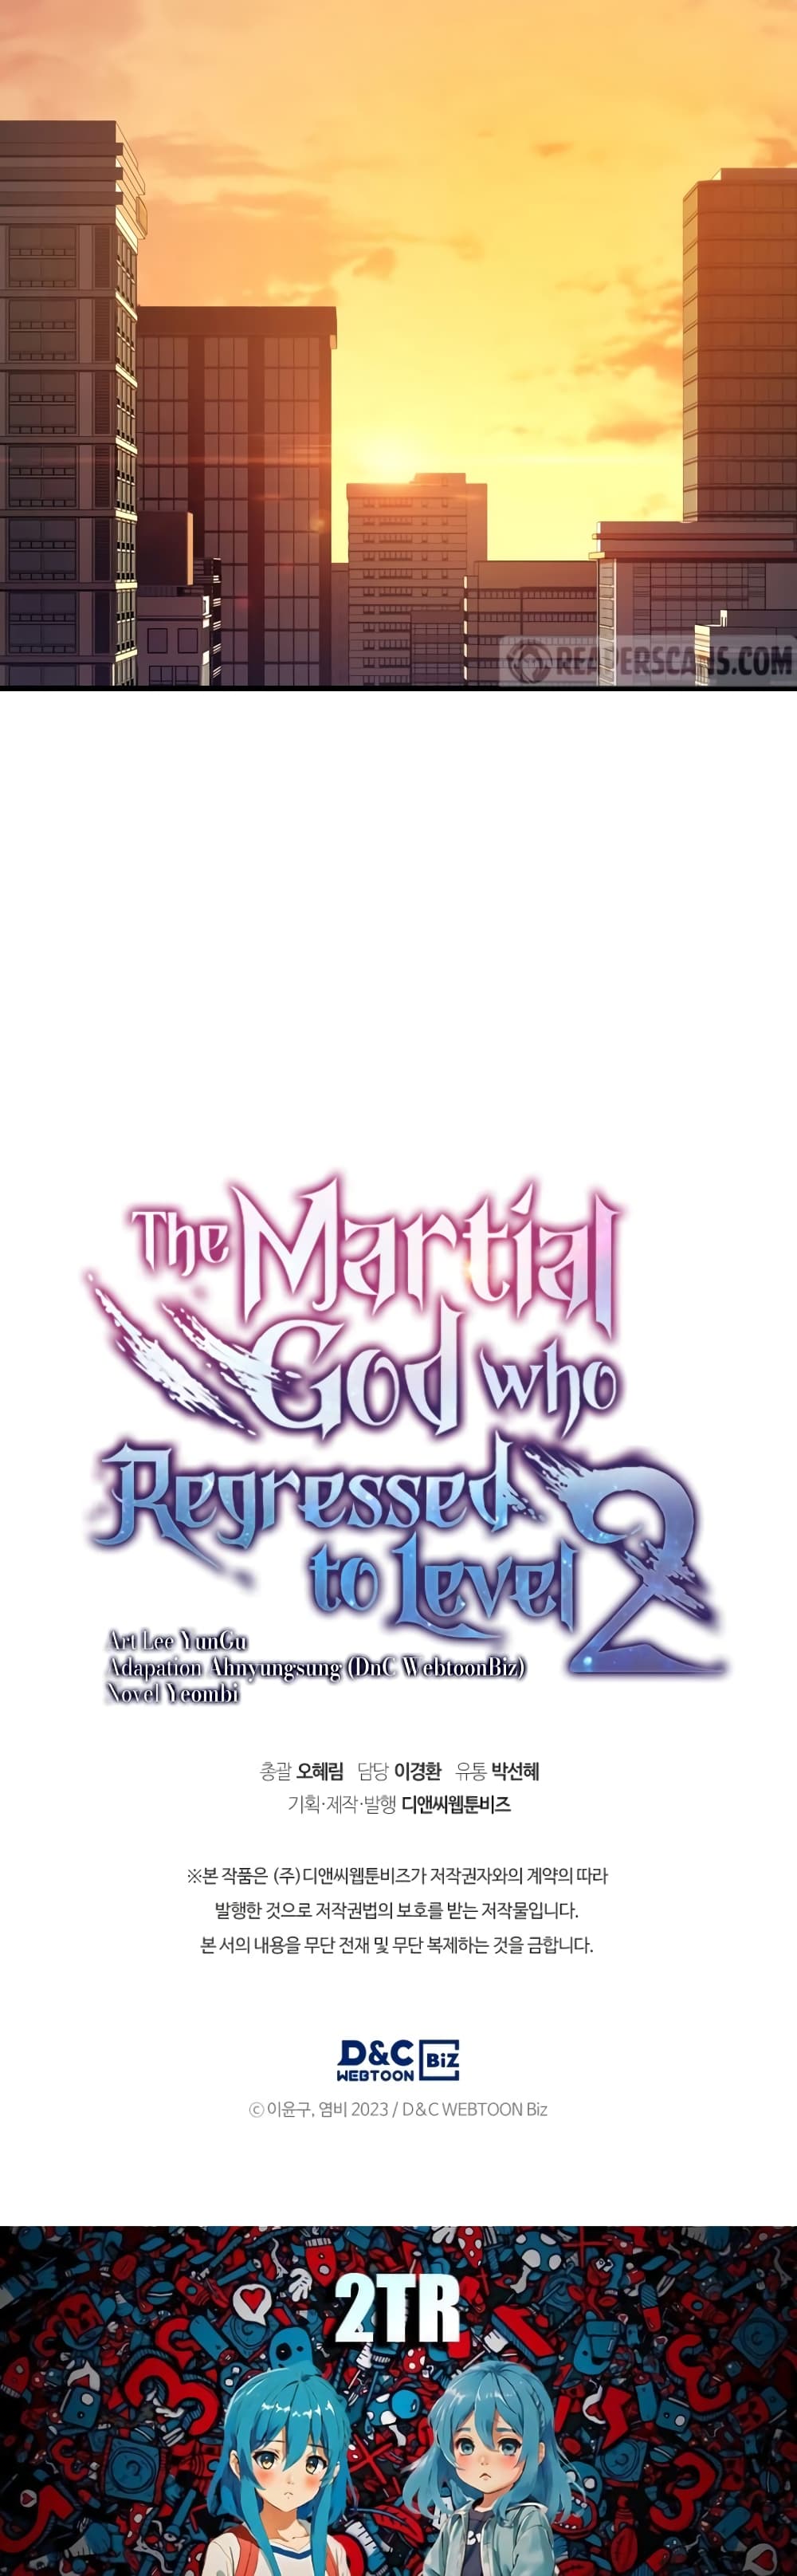 Martial God Regressed to Level 2 17-17